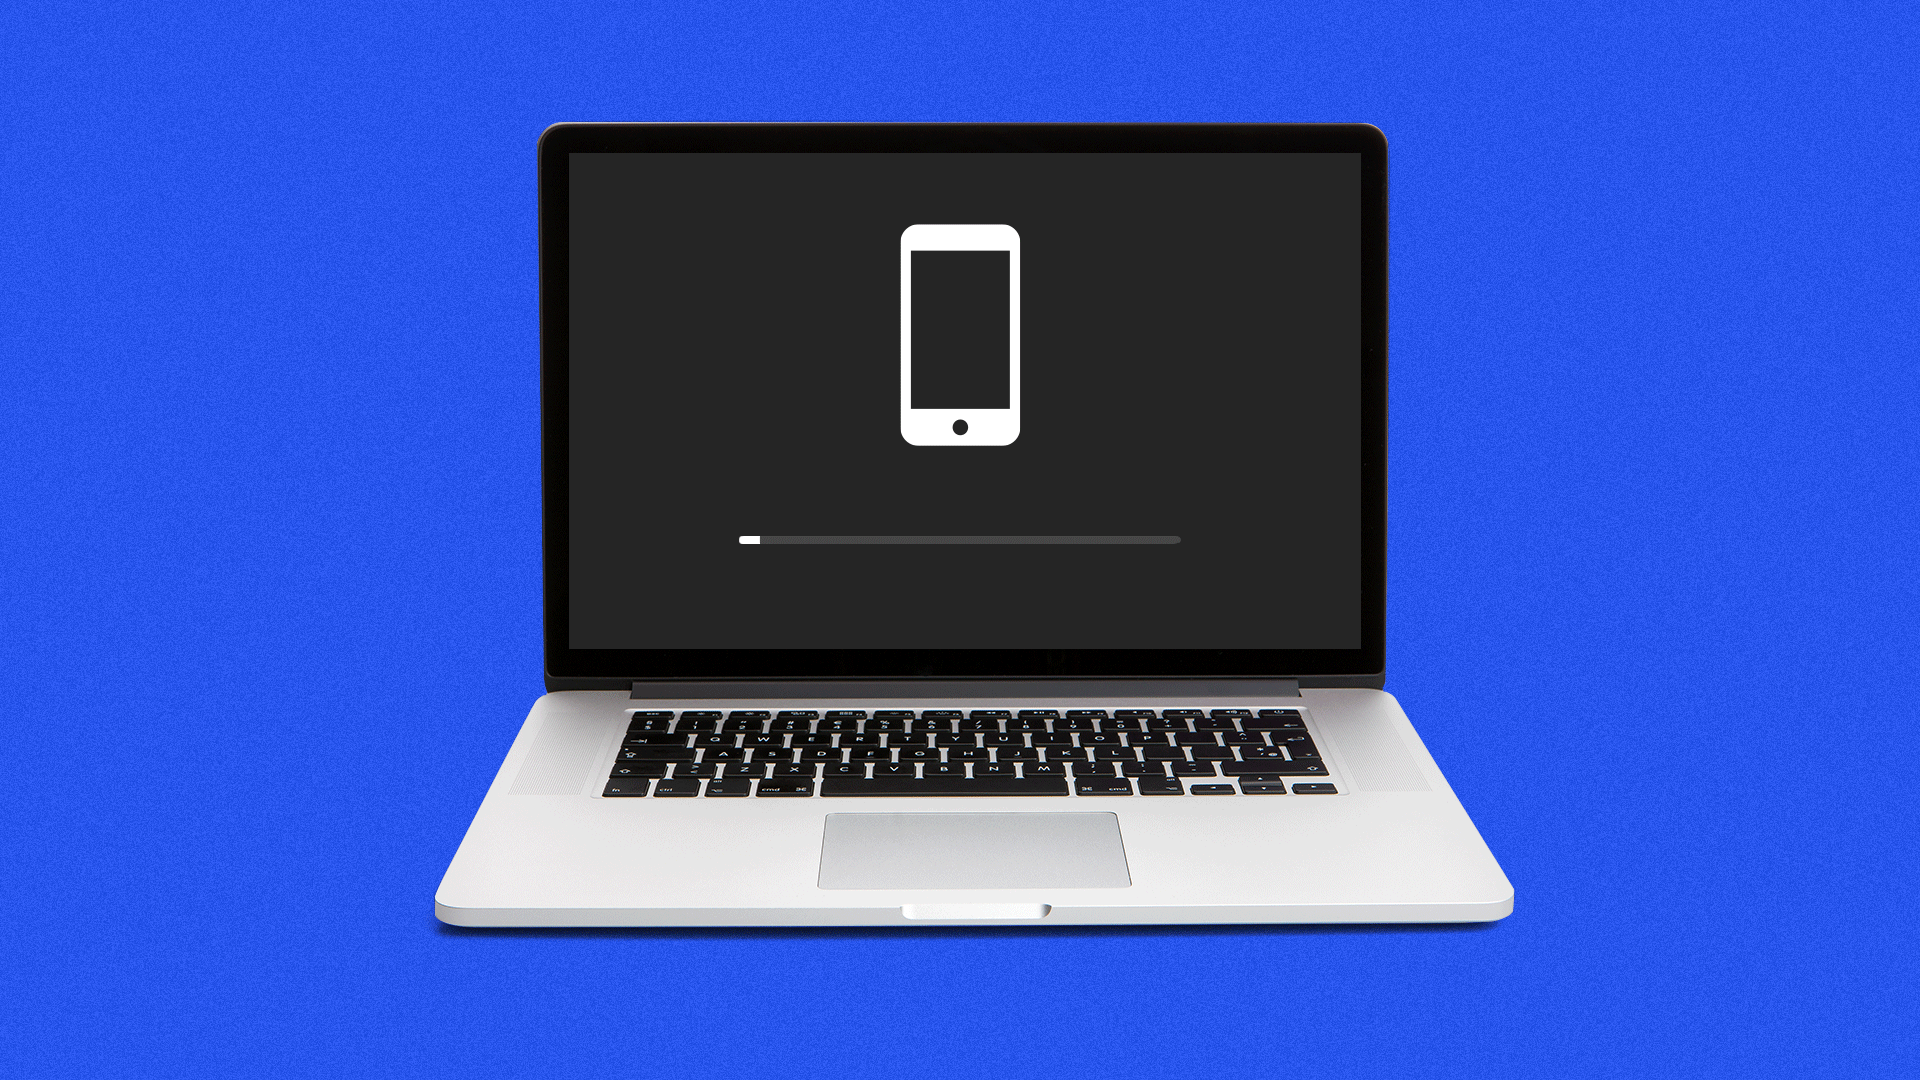 Illustration of a Mac loading screen with an iPhone icon instead of an Apple logo.